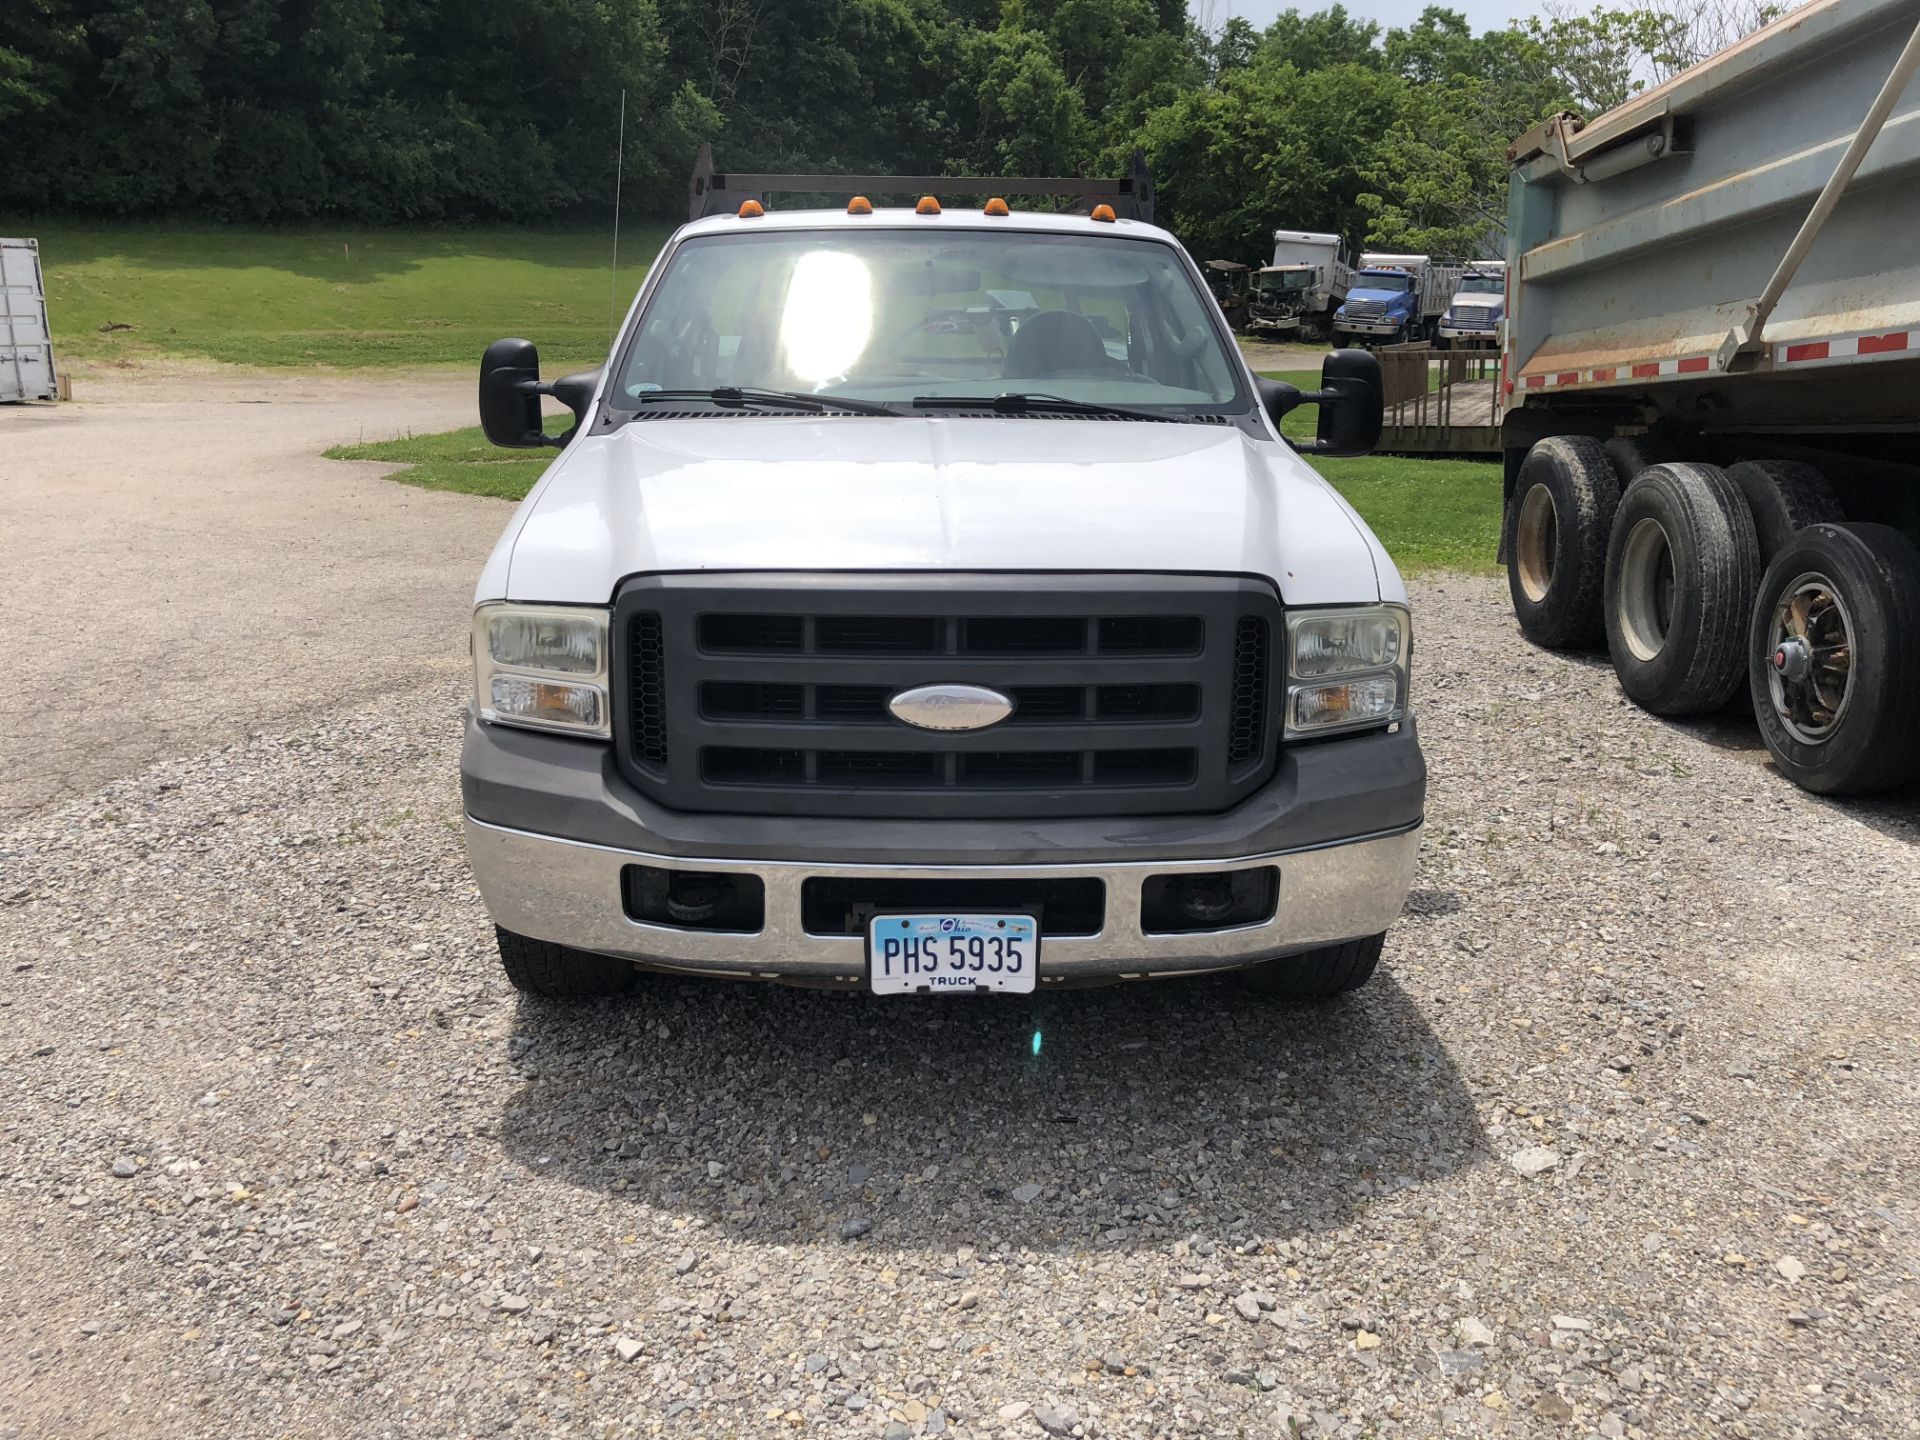 2005 FORD F-350 XL SUPER DUTY SERVICE TRUCK, GAS, 164,622 MILES - Image 2 of 5